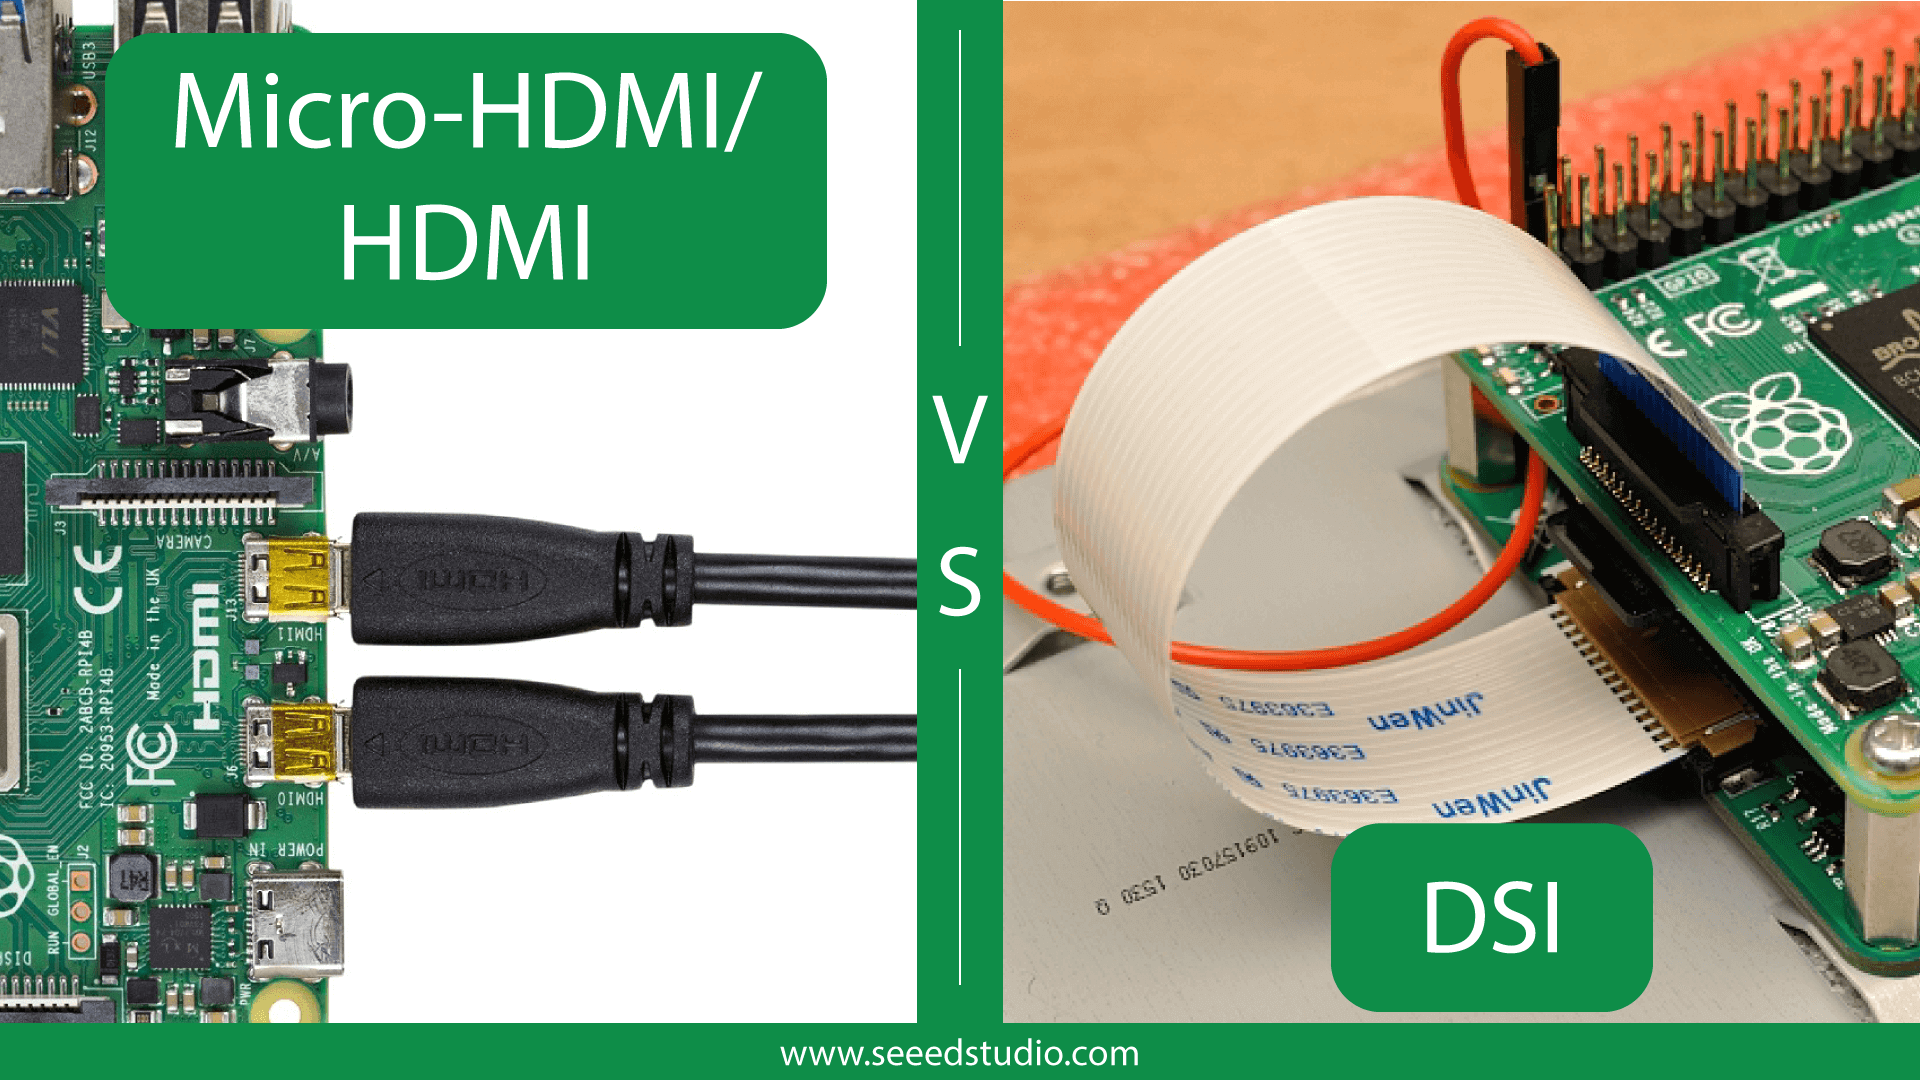 Par pistol meget fint HDMI/Micro-HDMI vs DSI – Raspberry Pi 4 Display Connectors - Latest Open  Tech From Seeed